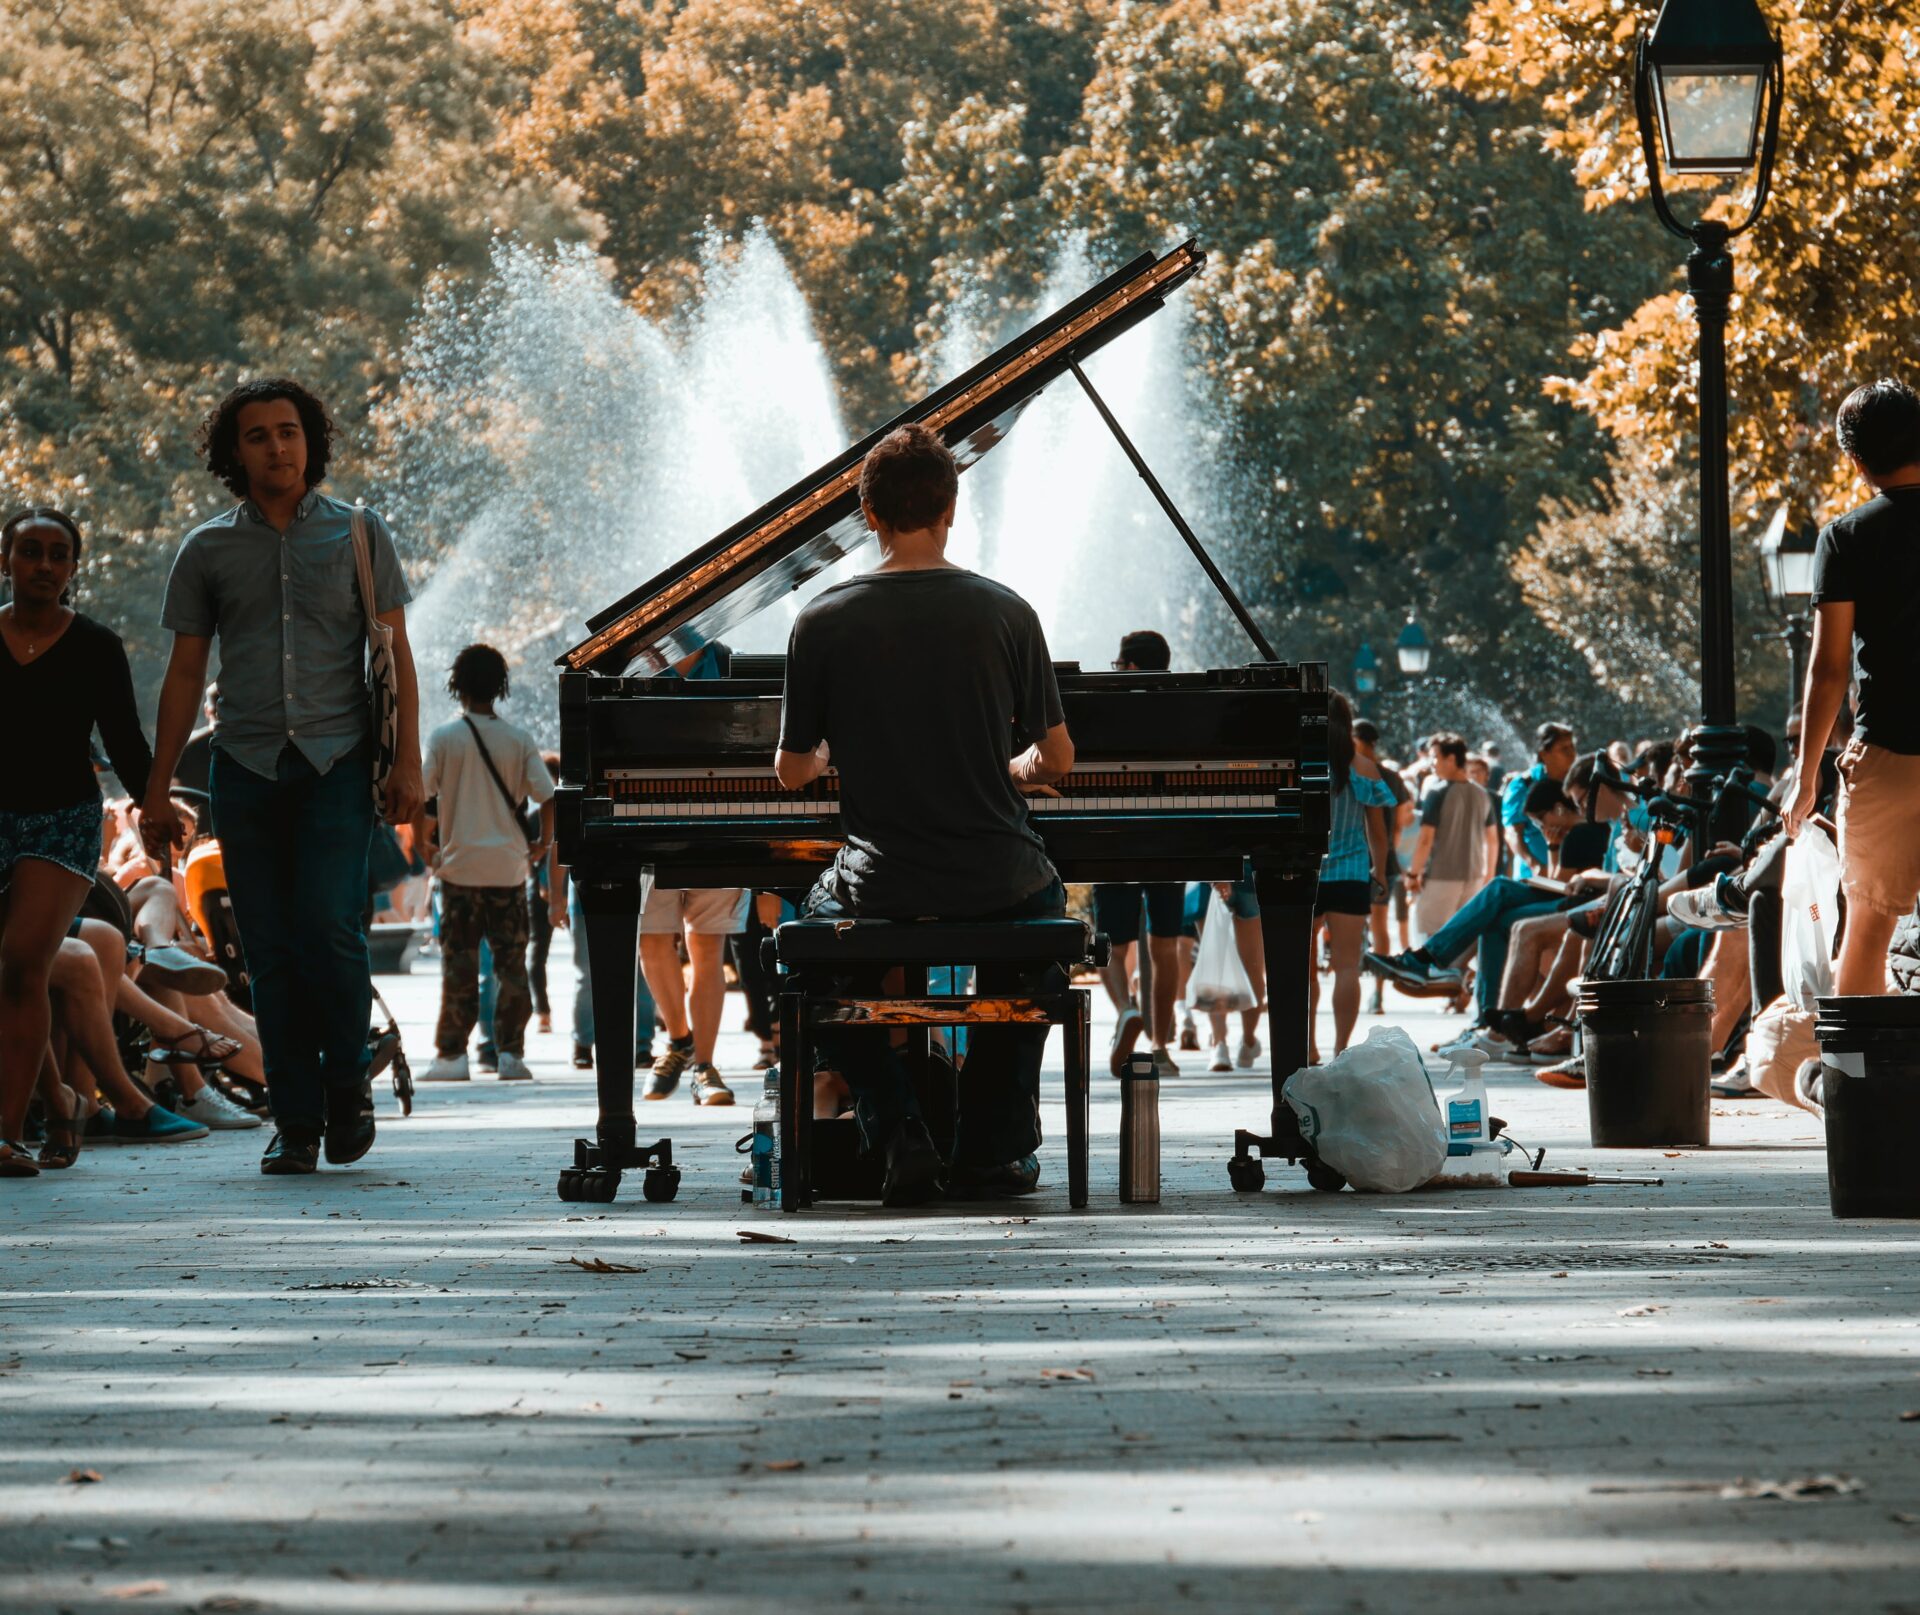 musician-making-money-busking-on-the-streets